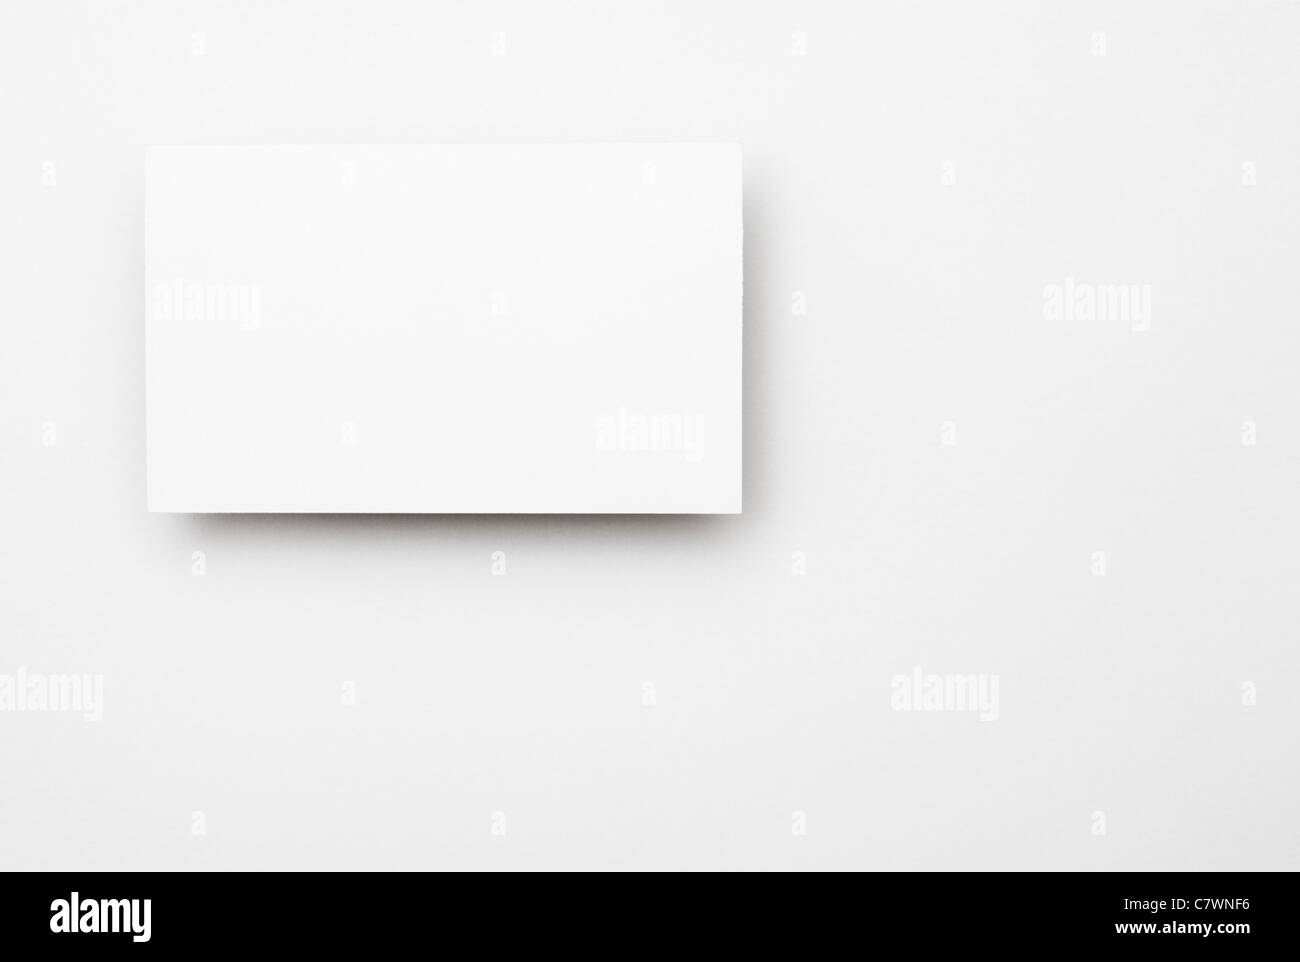 Blank business card. Foto Stock